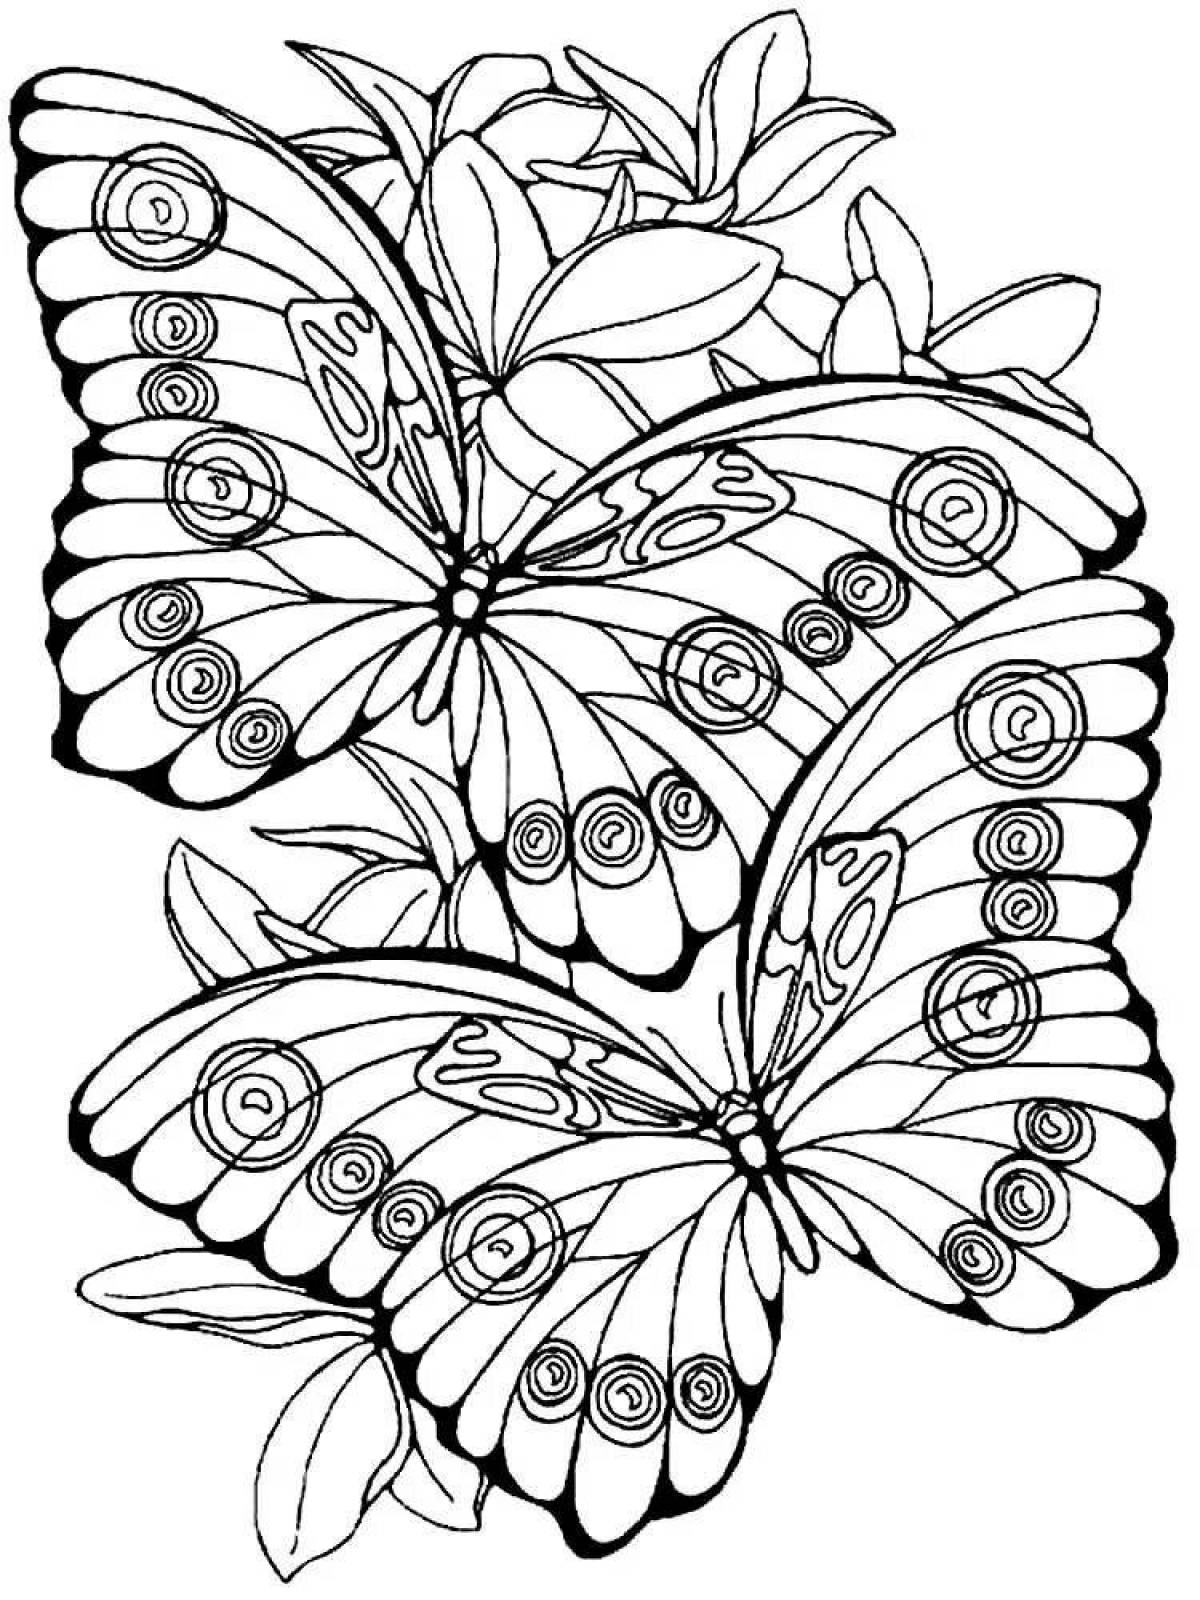 Colorful coloring page different nice